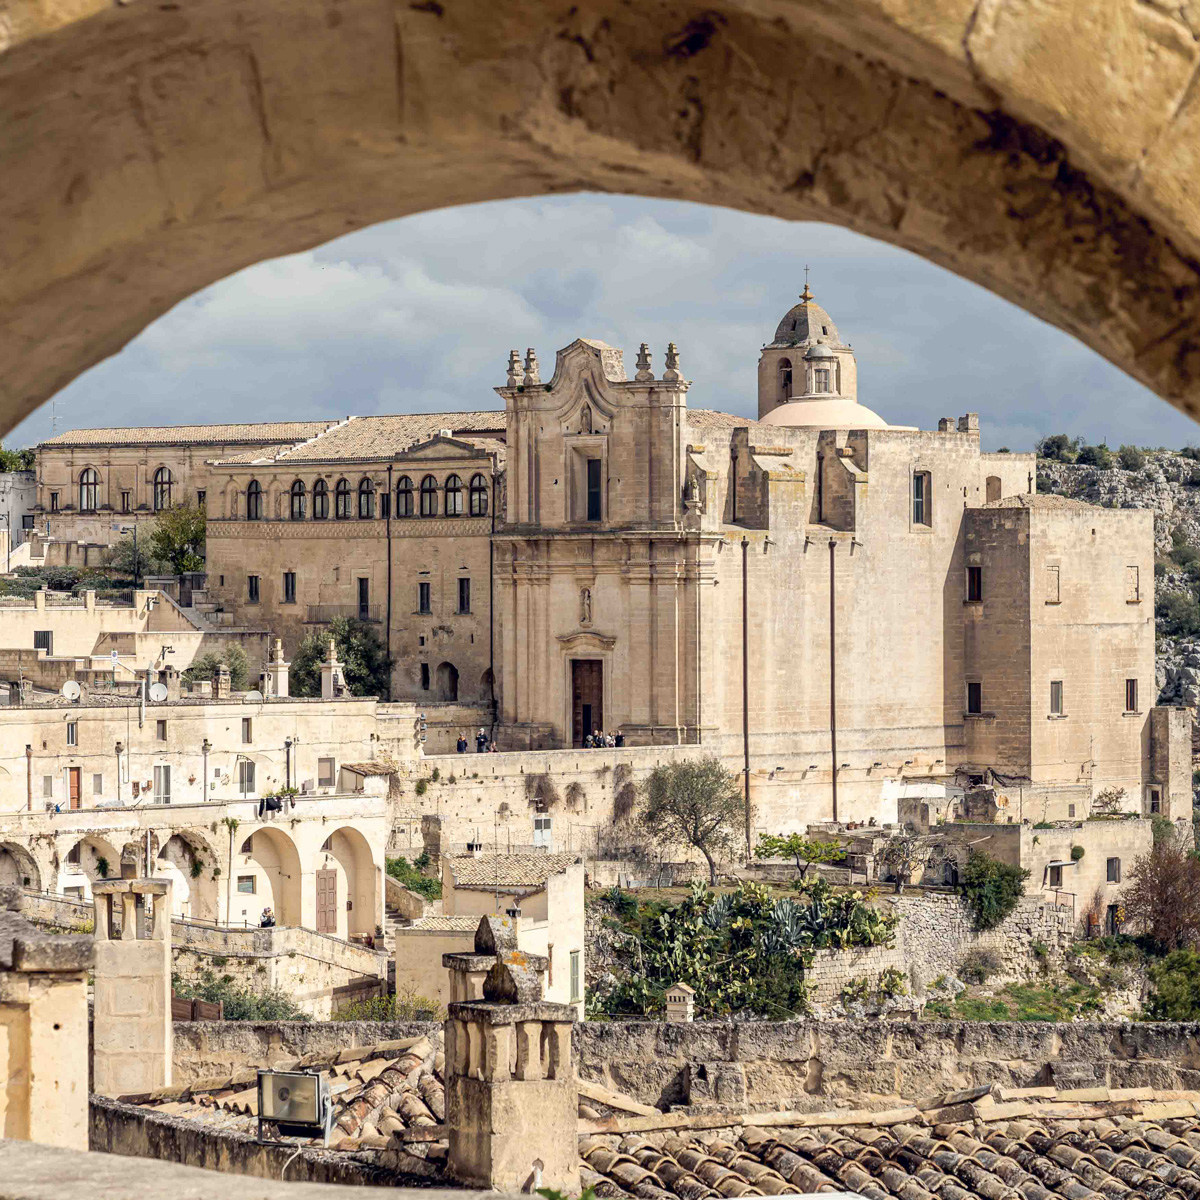 A view of Matera, one of the best cities in Italy to visit.